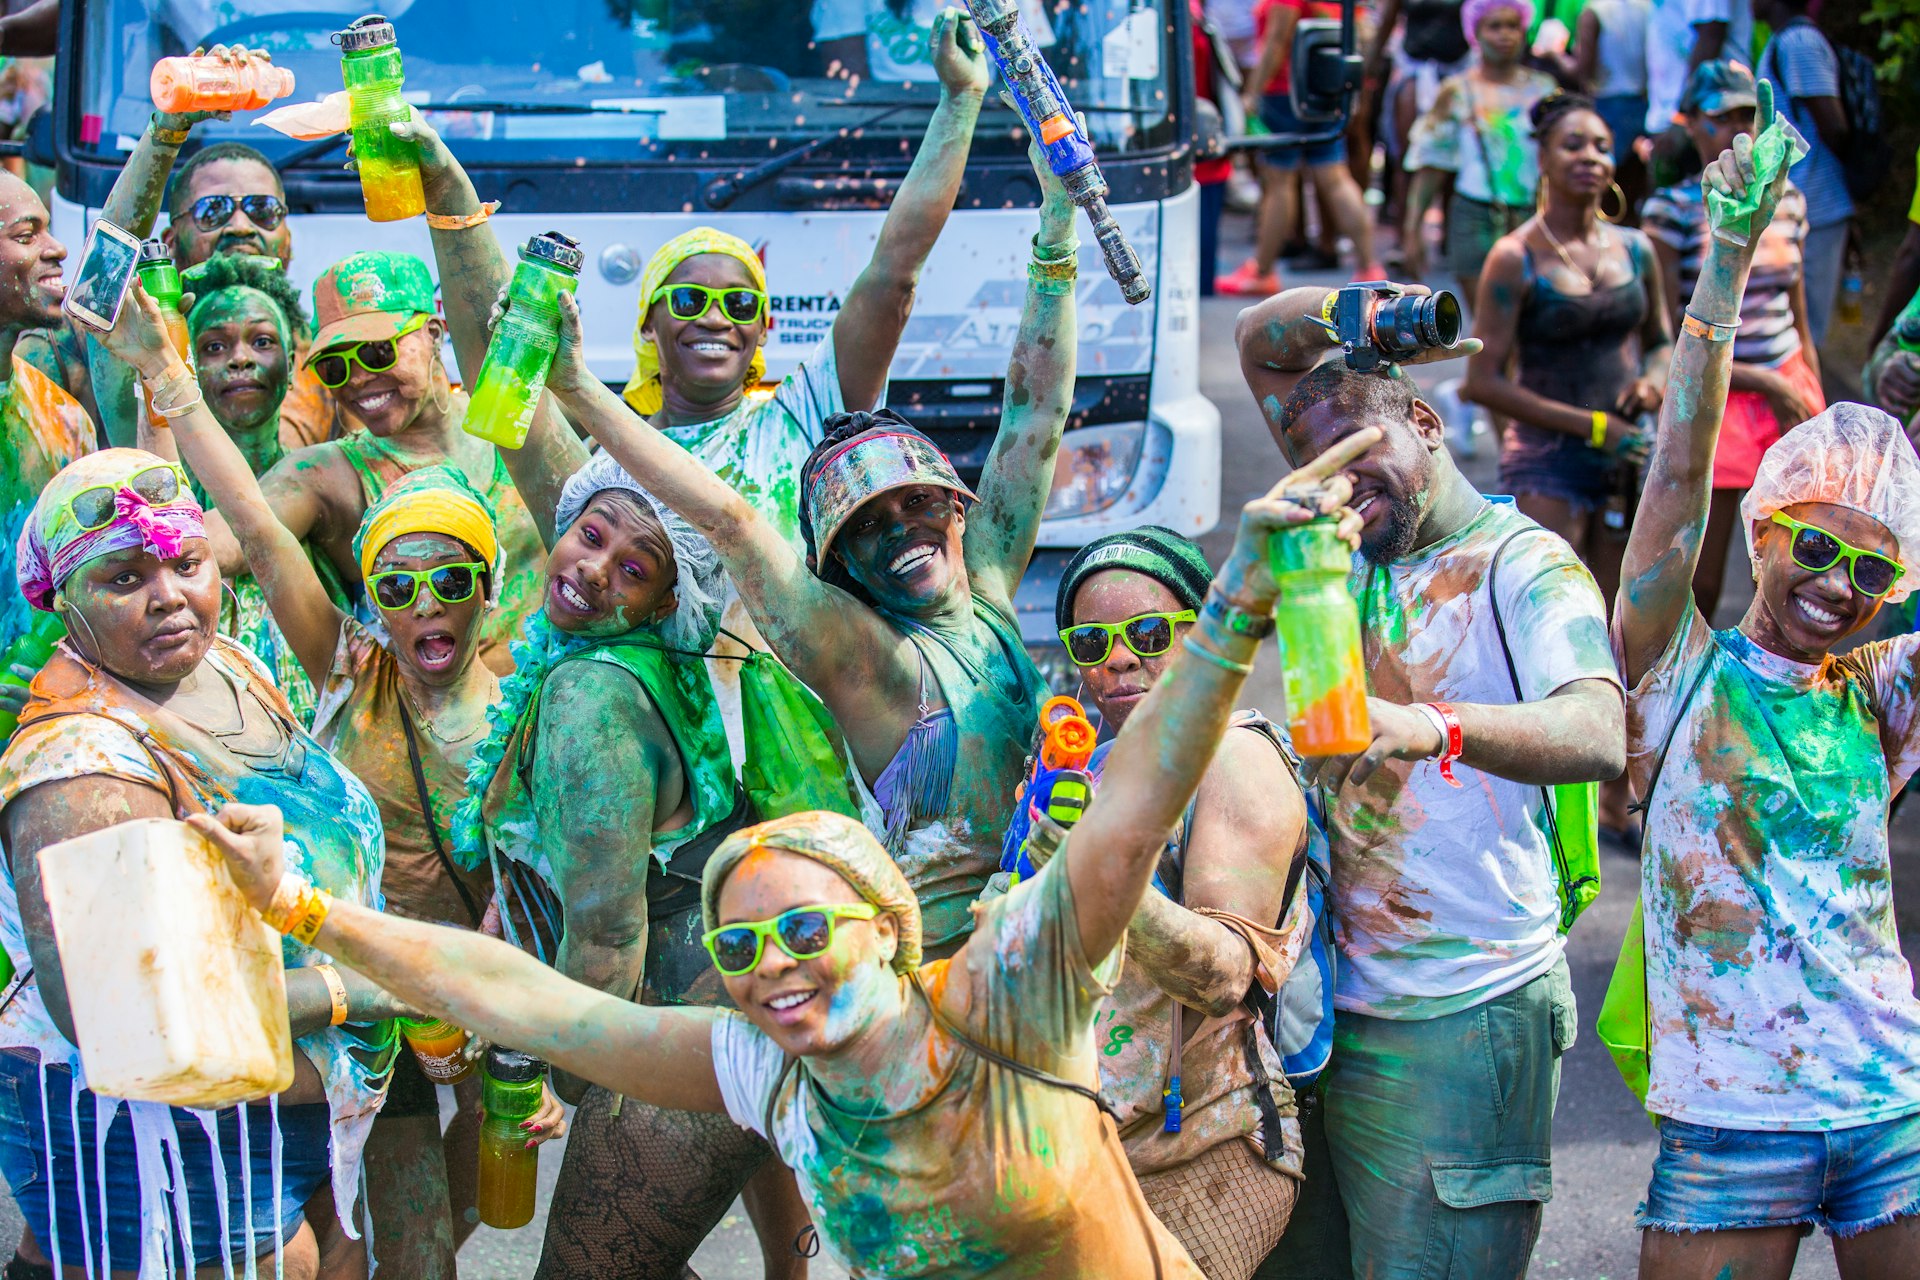 A crowd of people covered in paint, wearing sunglasses and carrying water bottles wave at the camera during a St Patrick's celebration in Montserrat